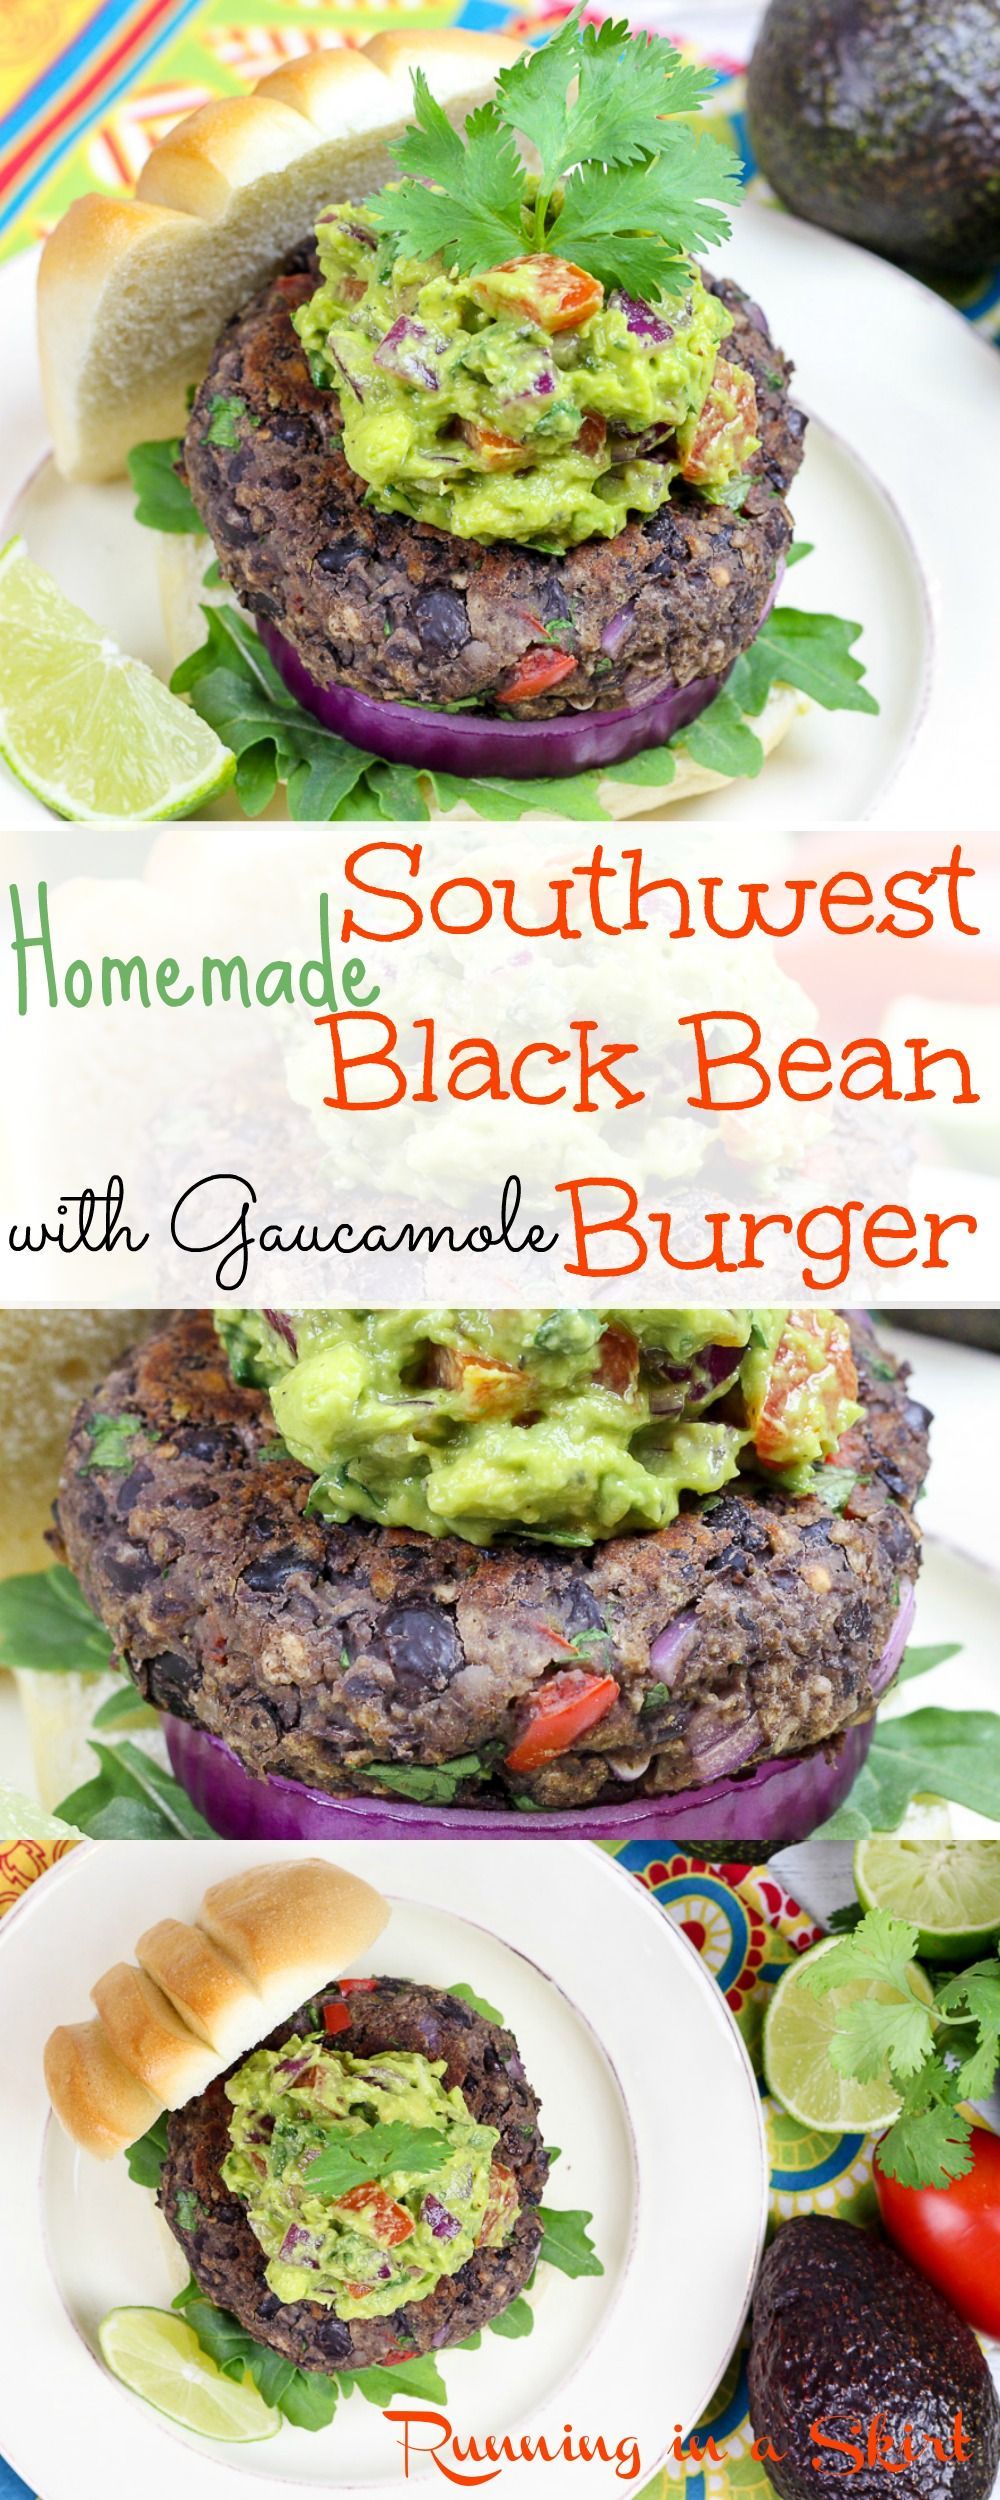 Easy & Healthy Homemade Southwest Black Bean Burgers with guacamole.  A vegetarian grilling option anyone will love.  These are